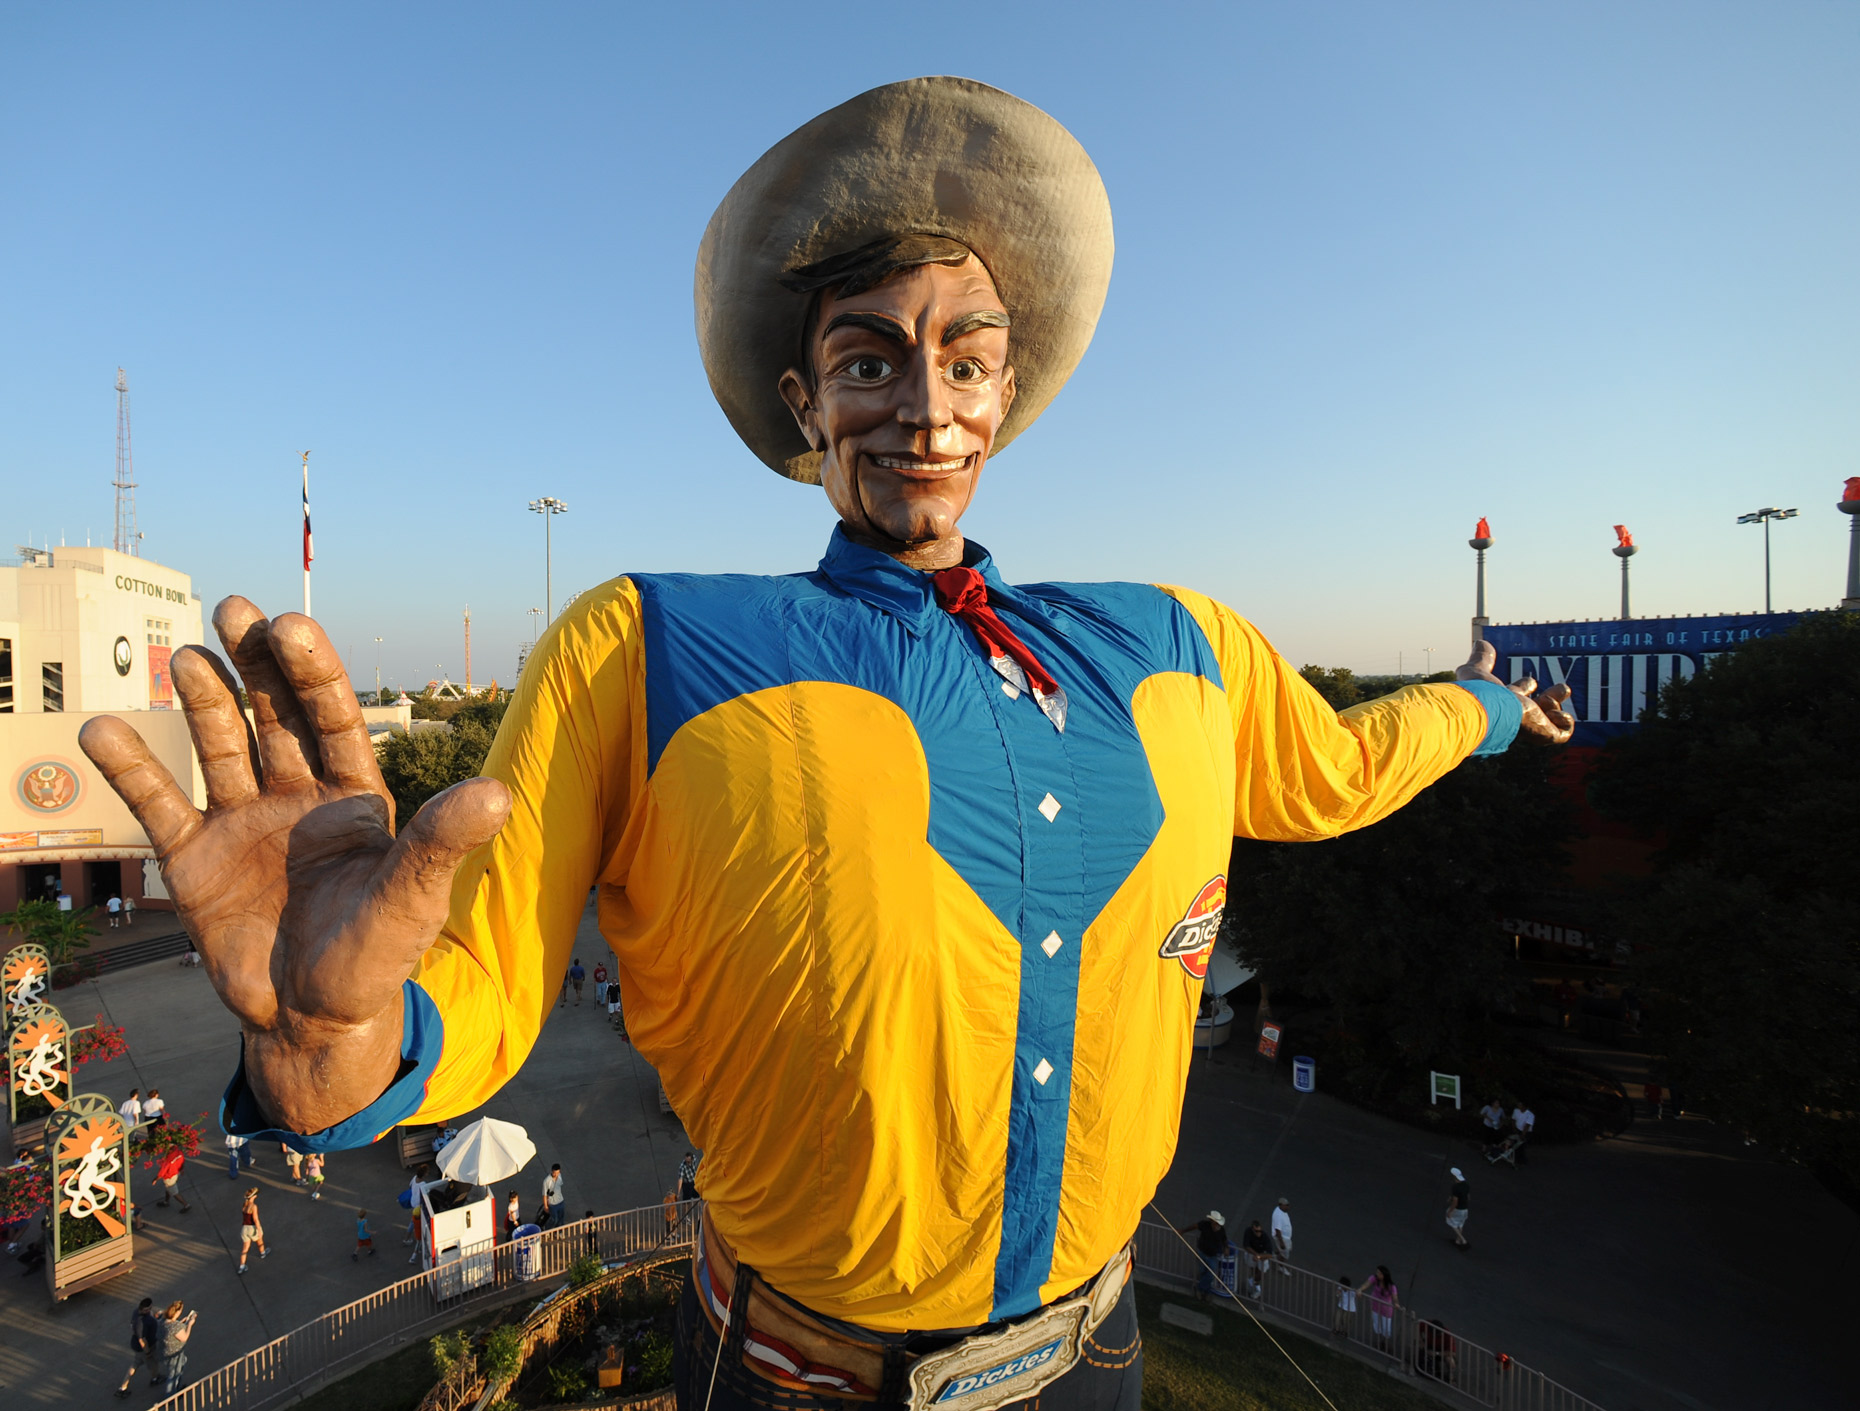 Big Tex at The State Fair of Texas. Photography by Kevin Brown